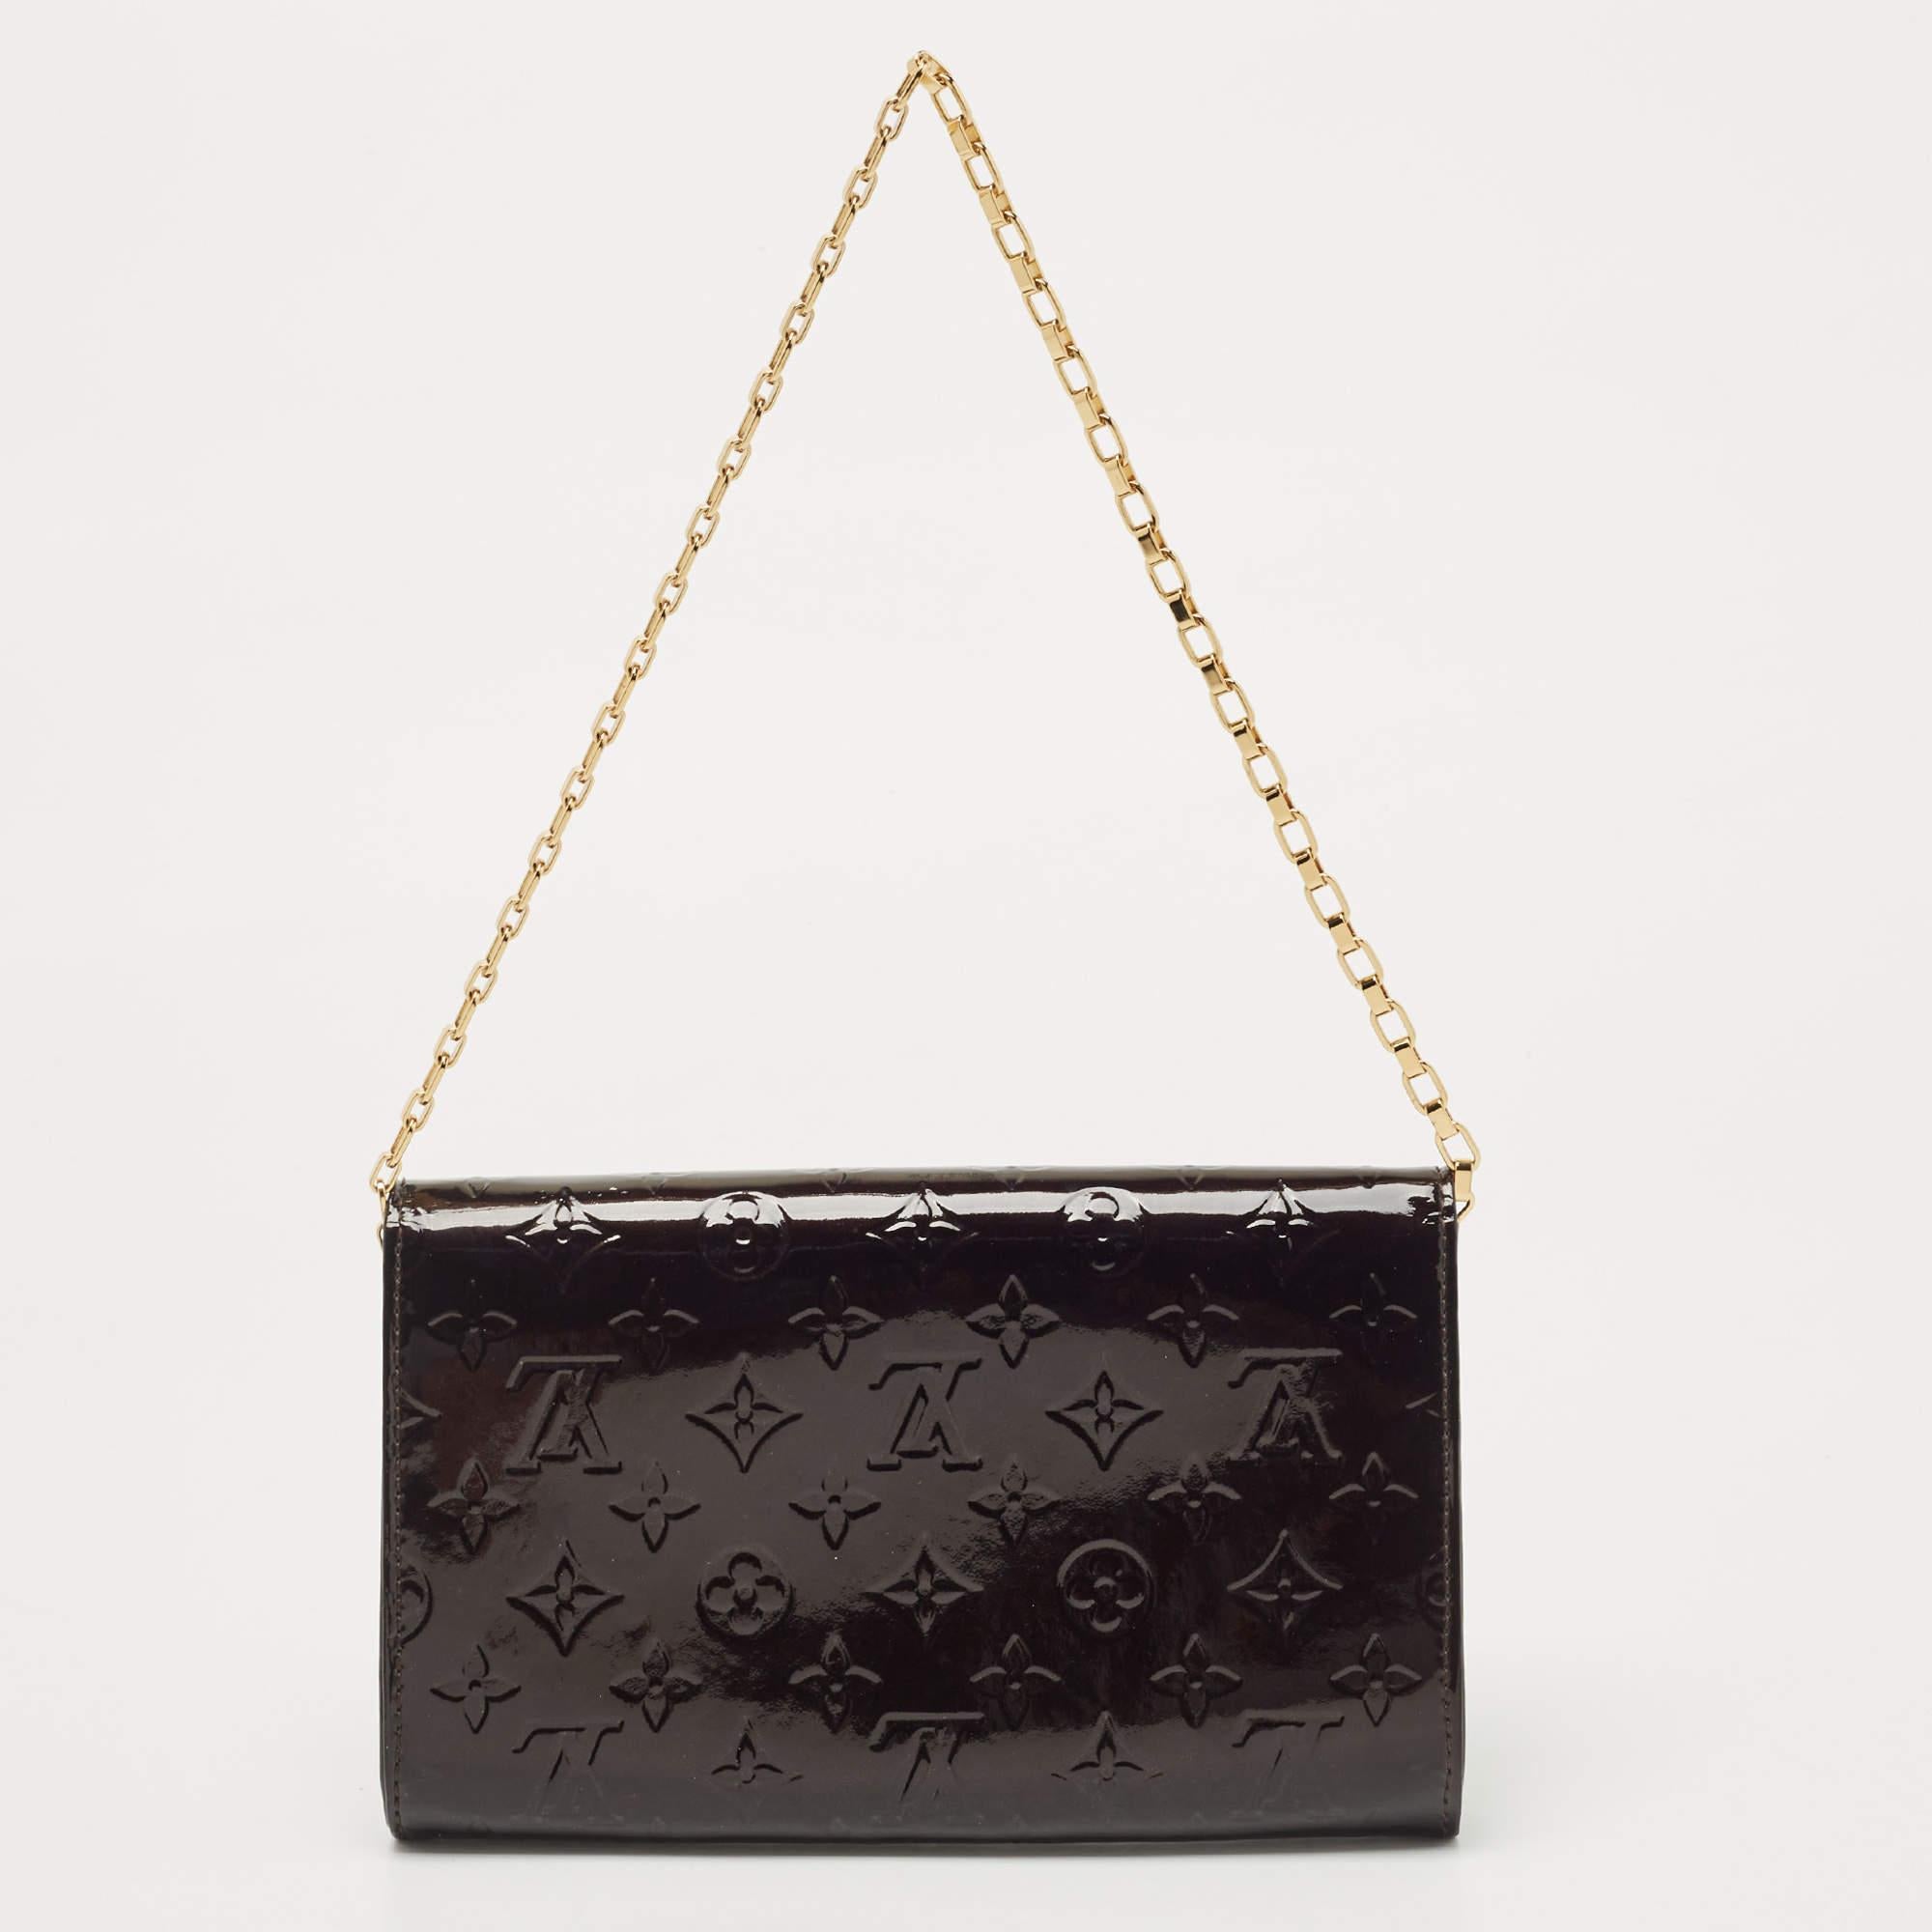 Louis Vuitton ensures you have a wonderful accessory to accompany you every day with this well-crafted bag. It has a signature look and a practical size.

Includes: Detachable Strap, Stained Original Dustbag

